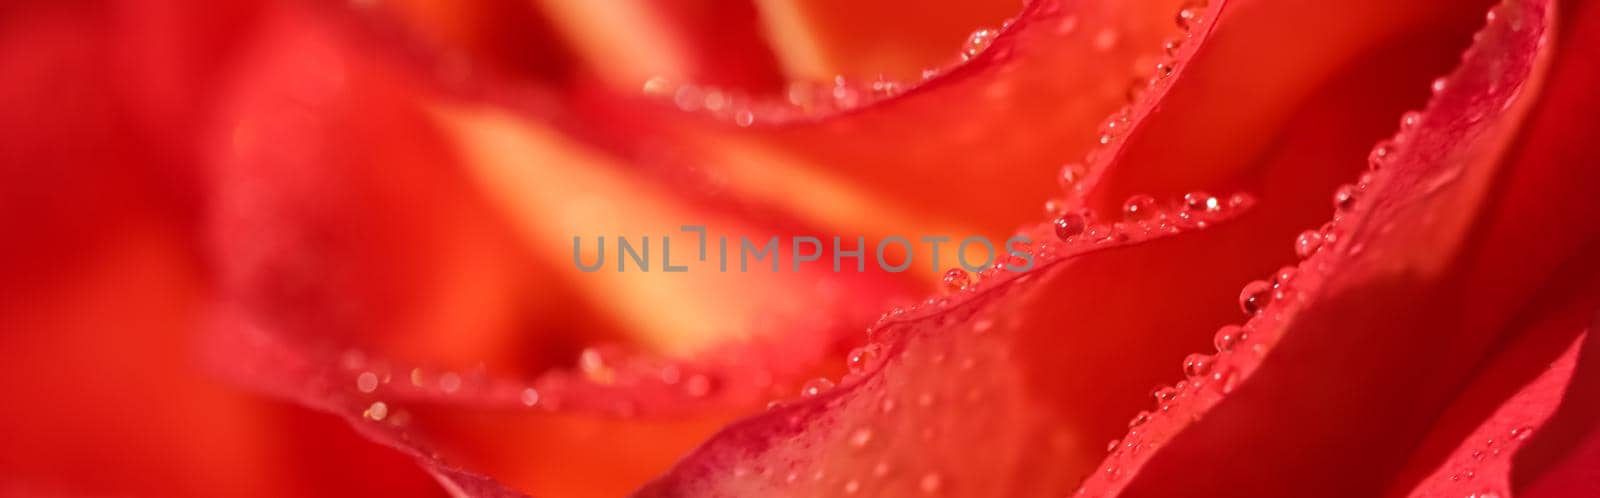 Soft focus, abstract floral background, red rose flower with water drops. Macro flowers backdrop for holiday design by Olayola